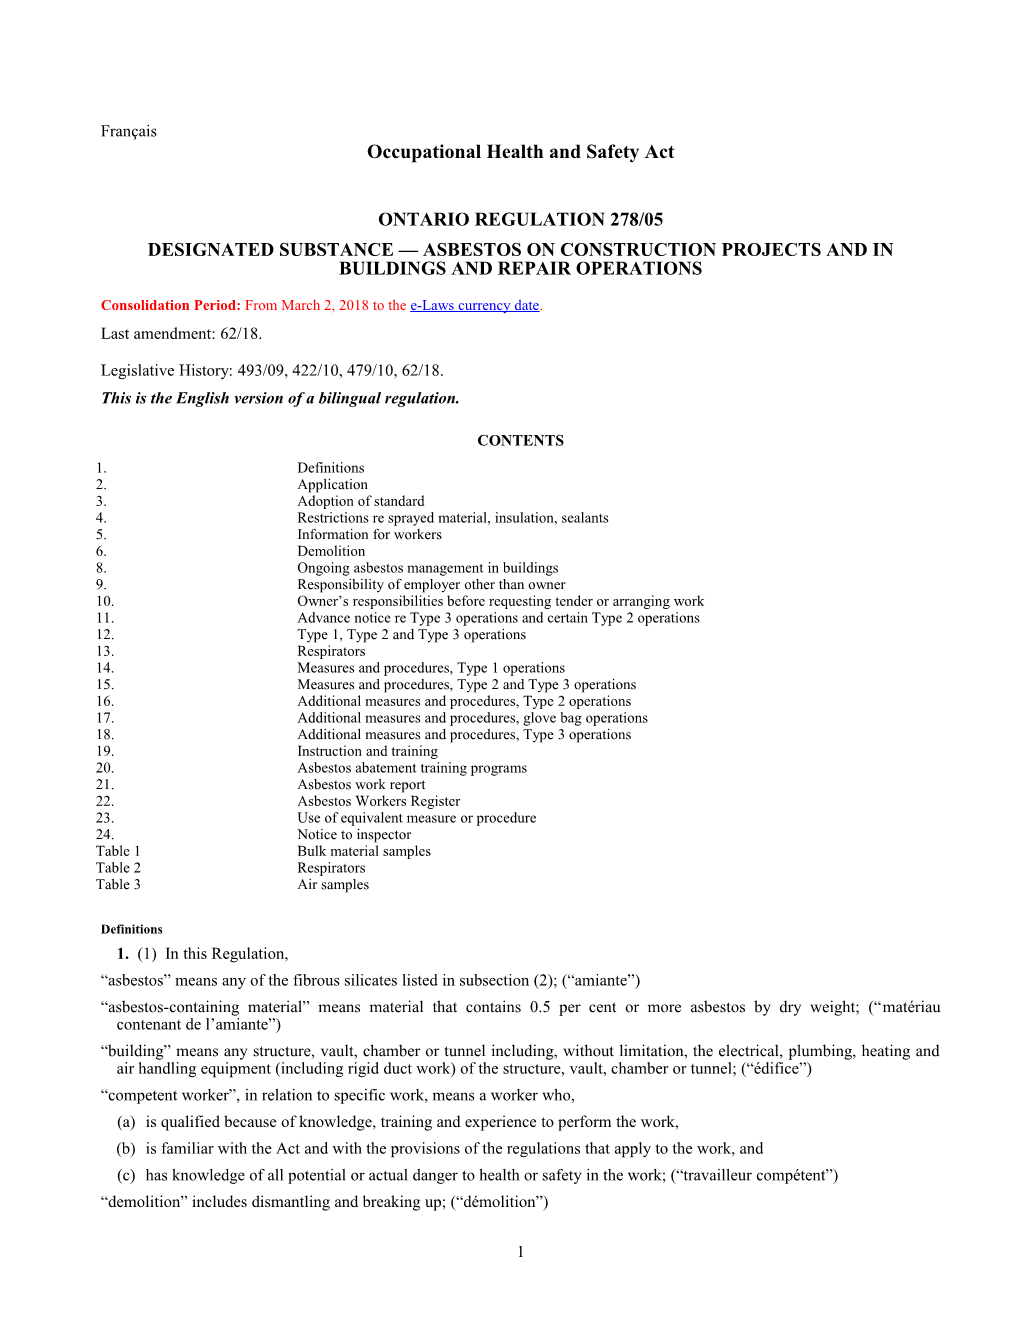 Occupational Health and Safety Act - O. Reg. 278/05